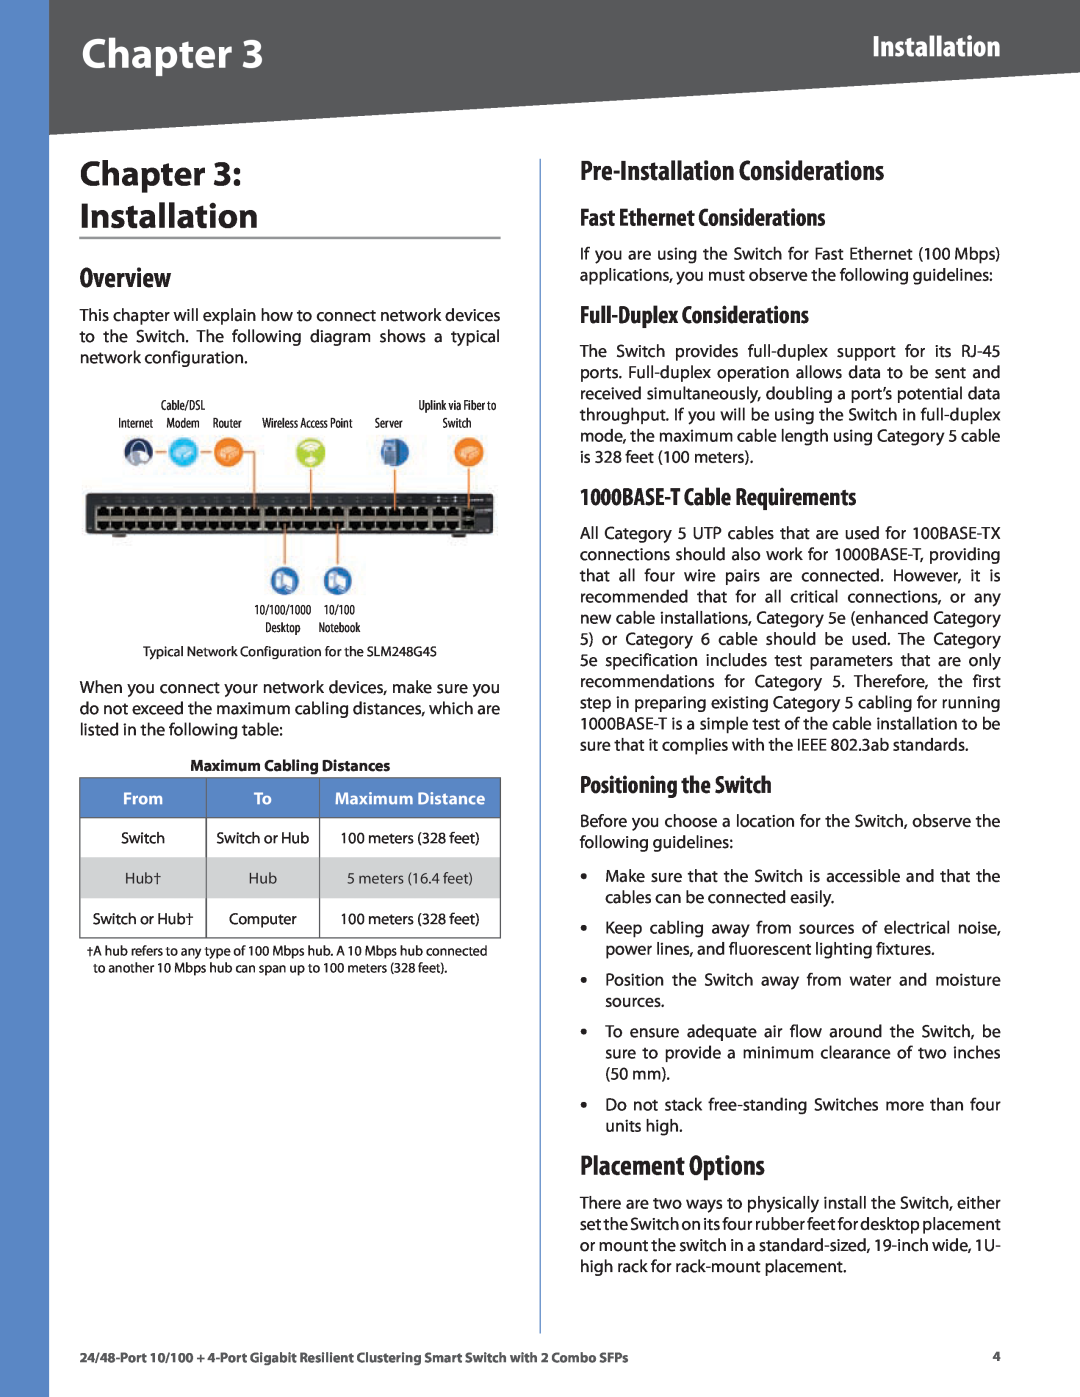 Linksys SLM224G4S manual Chapter Installation, Overview, Pre-Installation Considerations, Placement Options, From 